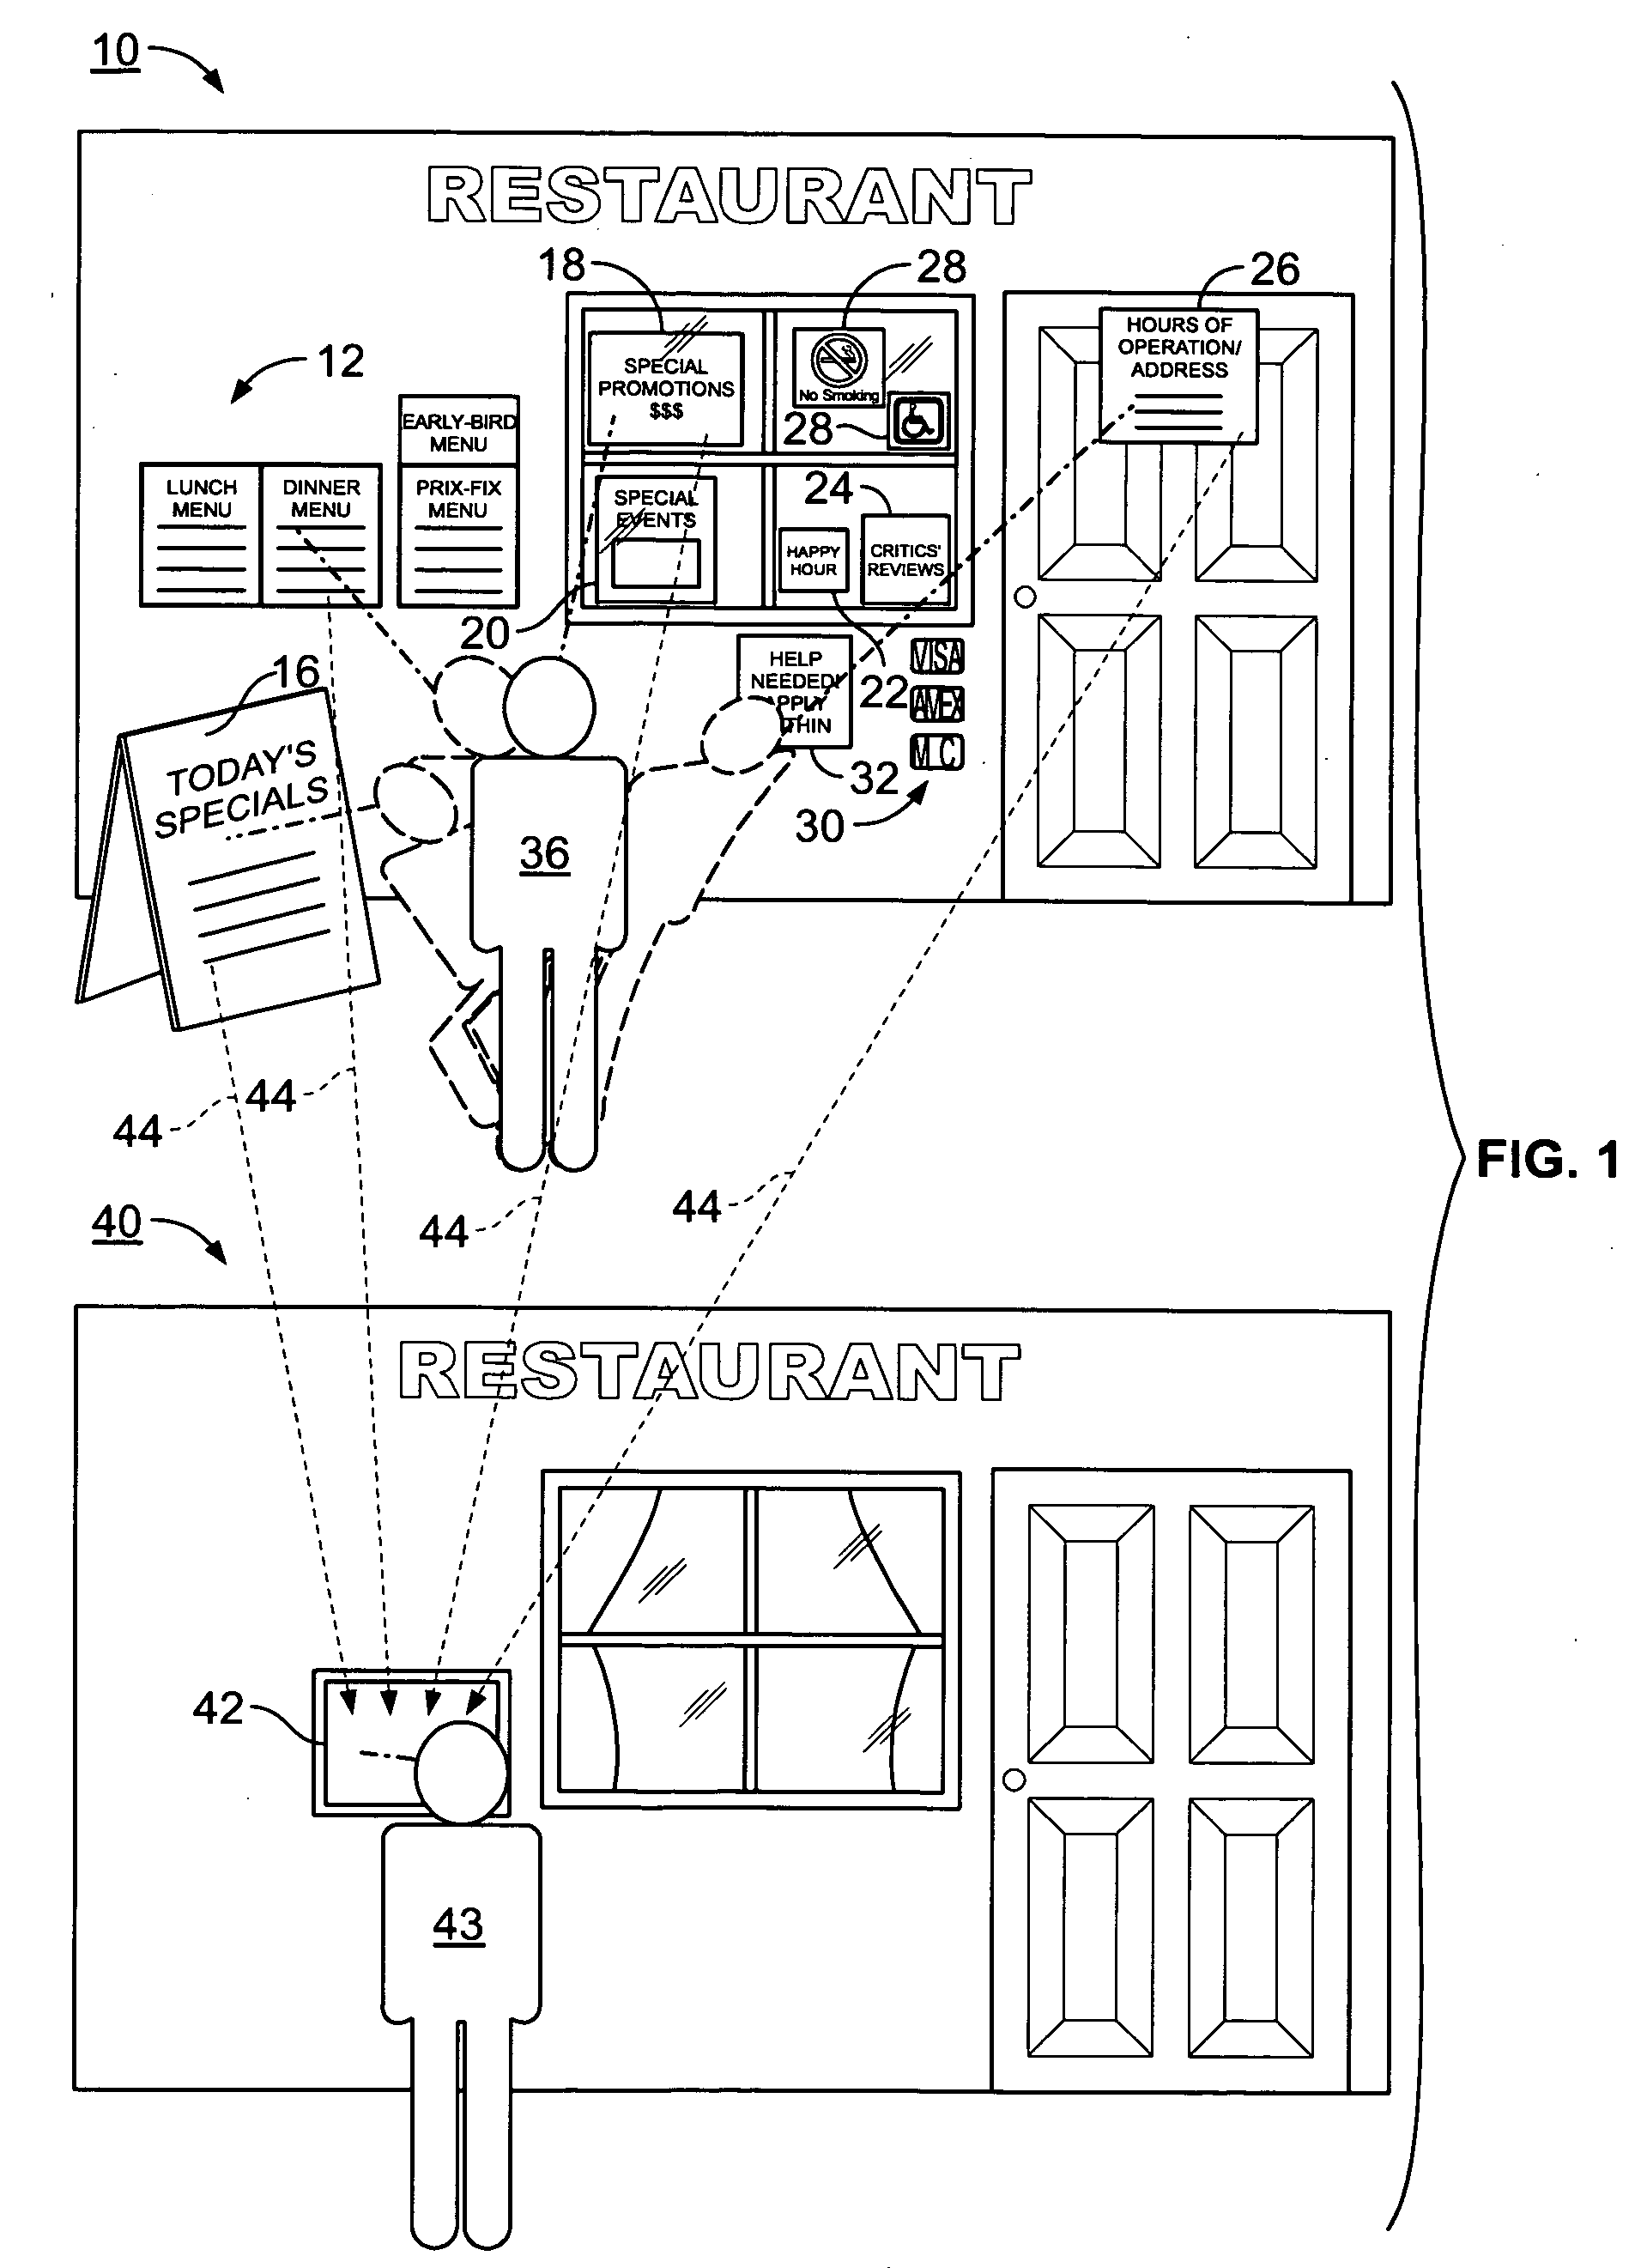 Method of rapidly informing a passerby about a food-and-beverage establishment